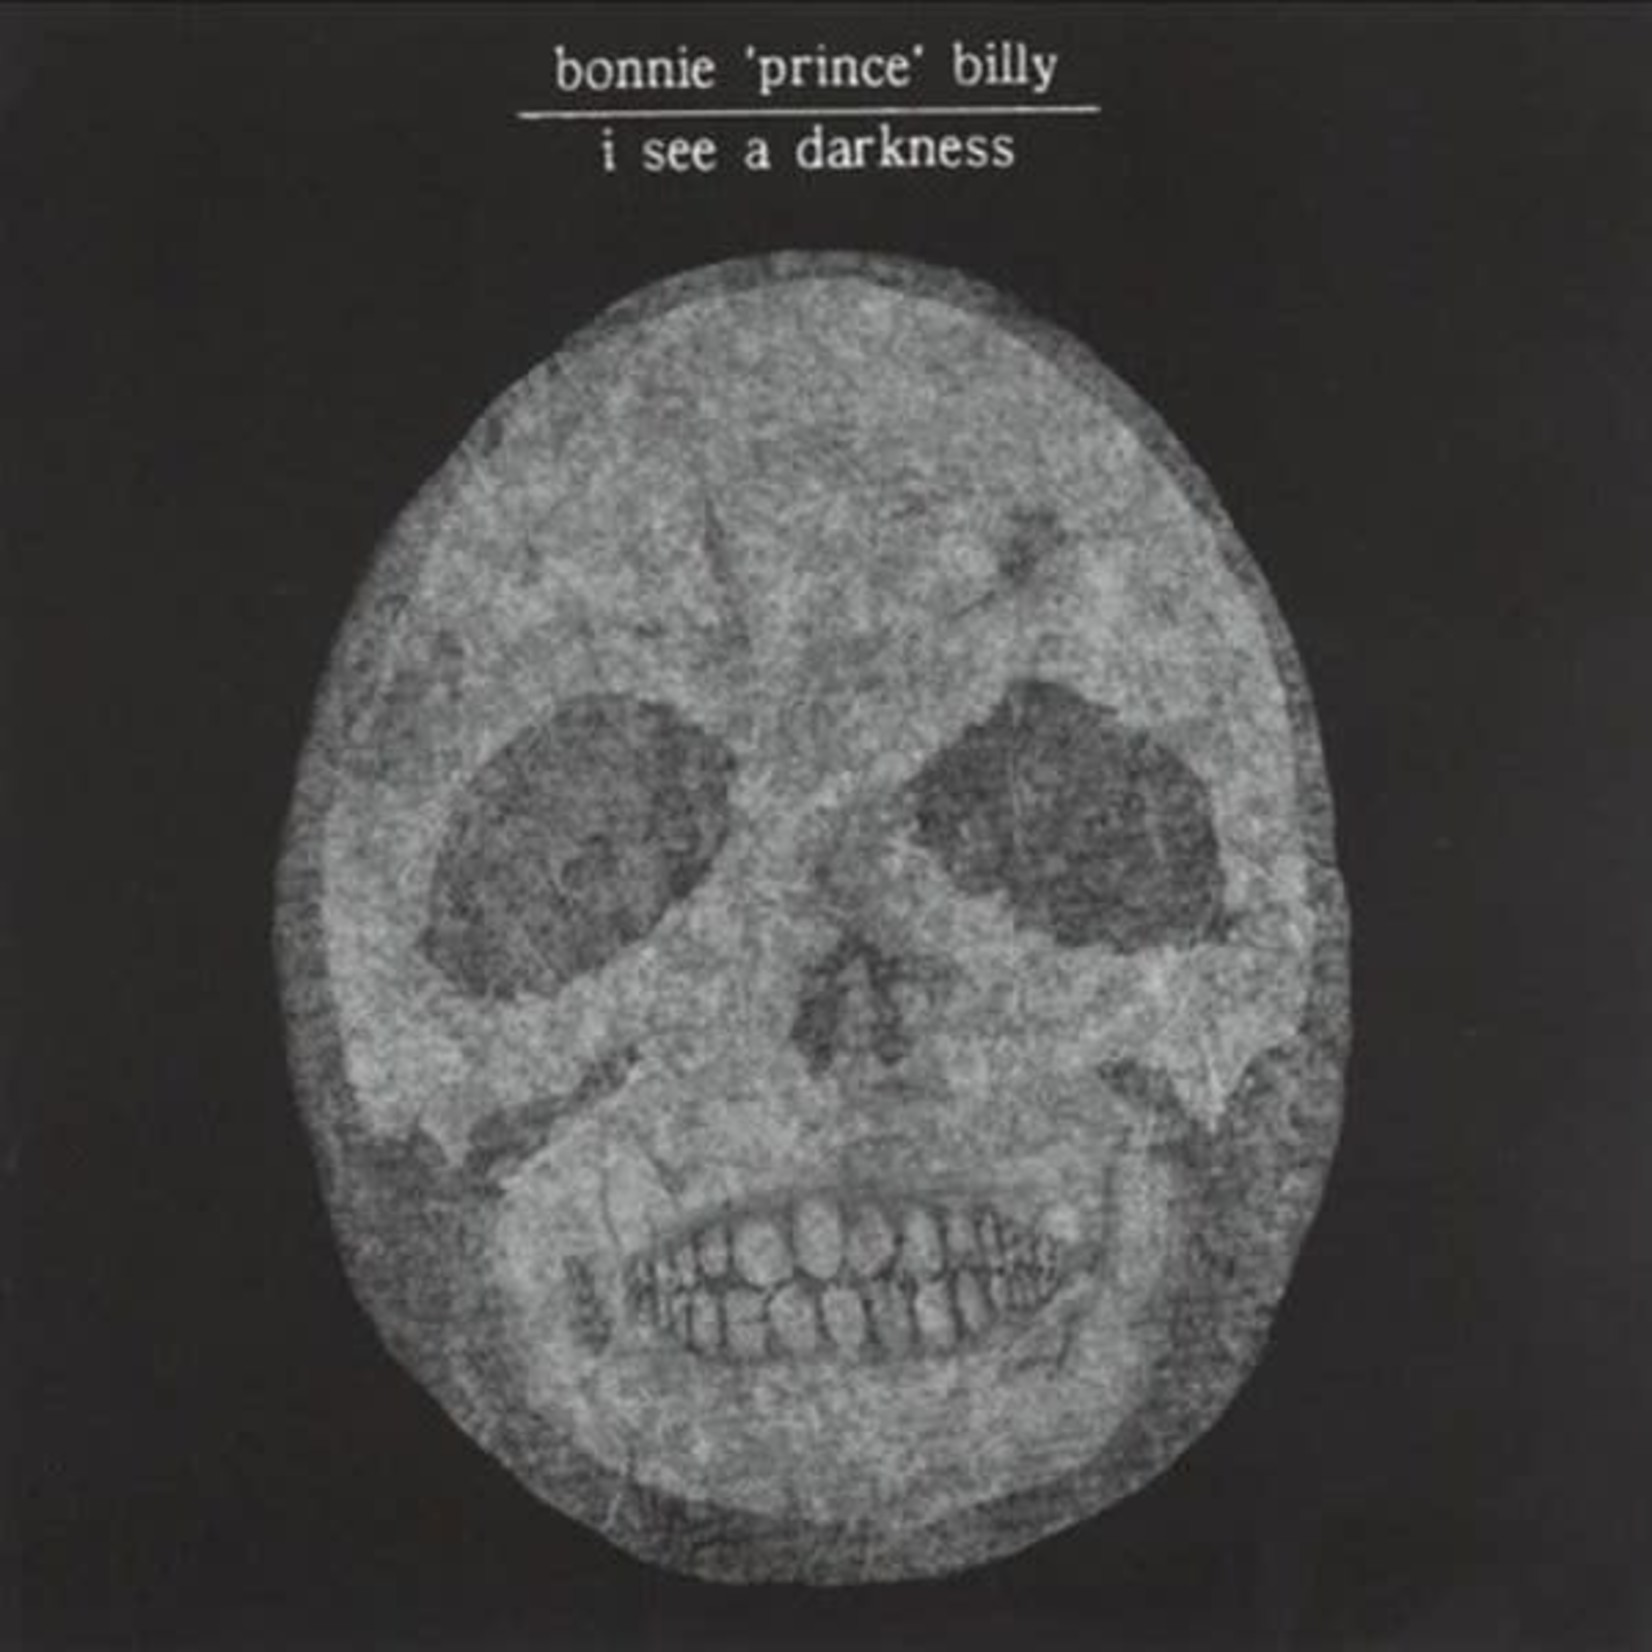 [New] Bonnie Prince Billy - I See a Darkness